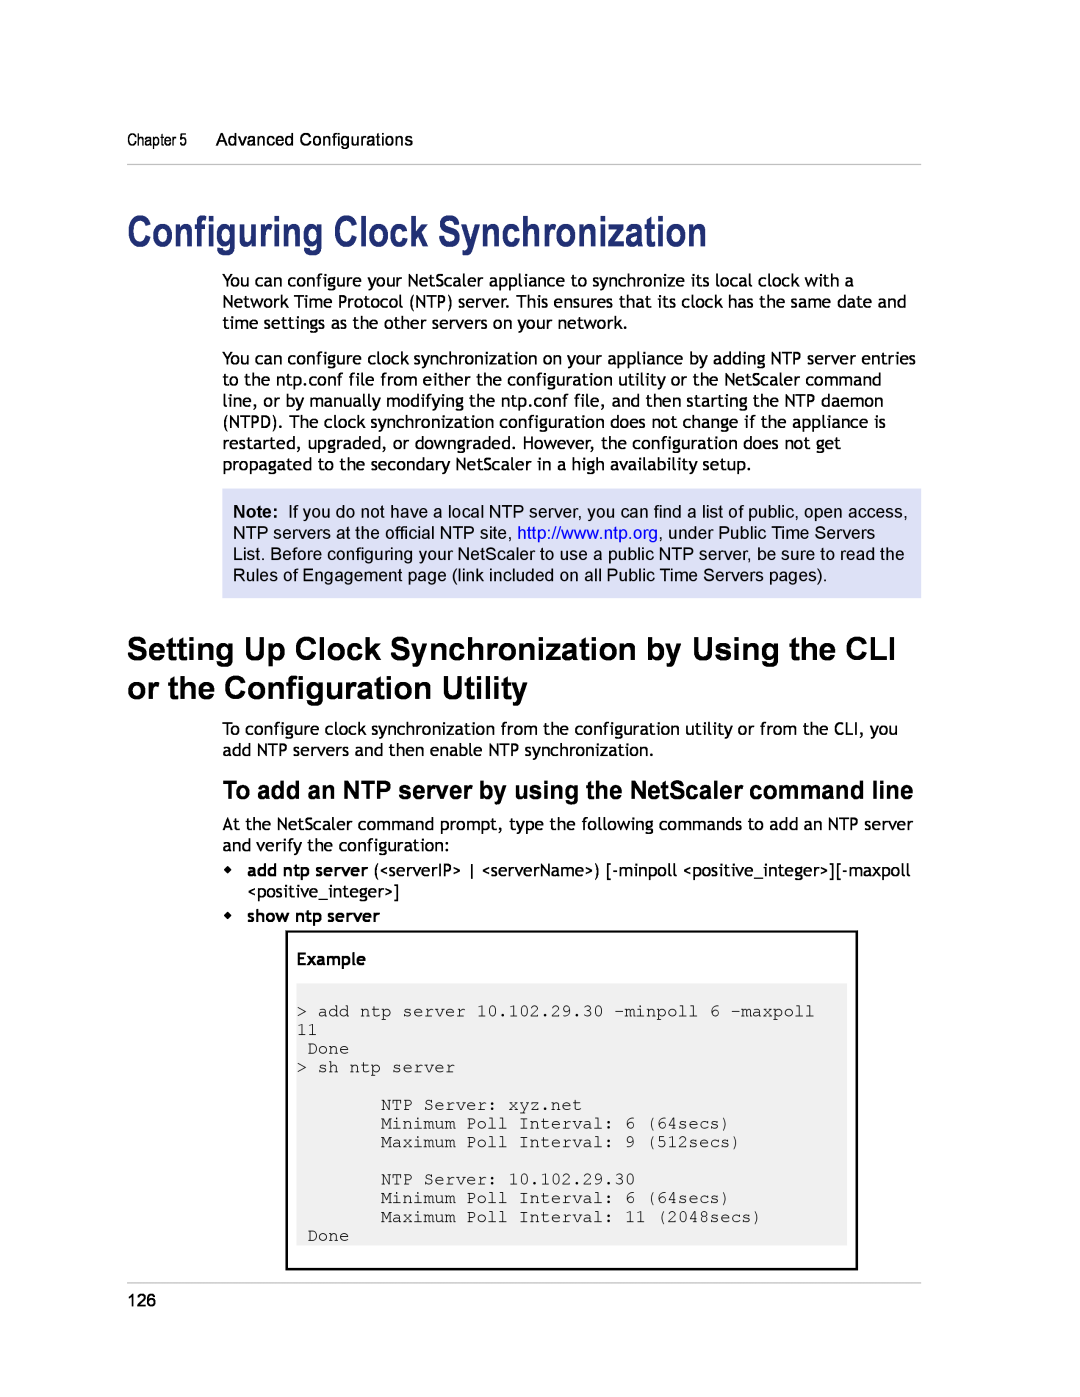 Citrix Systems CITRIX NETSCALER 9.3 manual Configuring Clock Synchronization, w show ntp server Example 